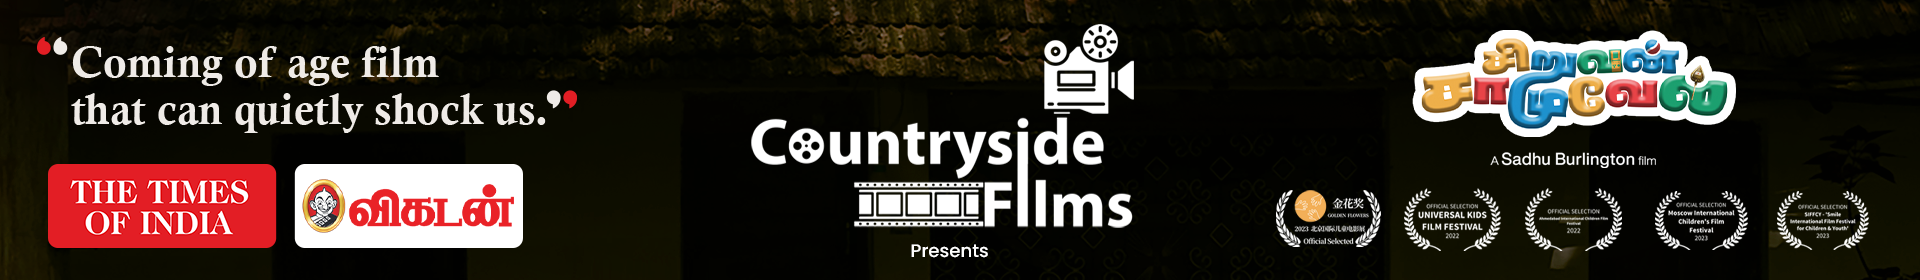 Countryside Films